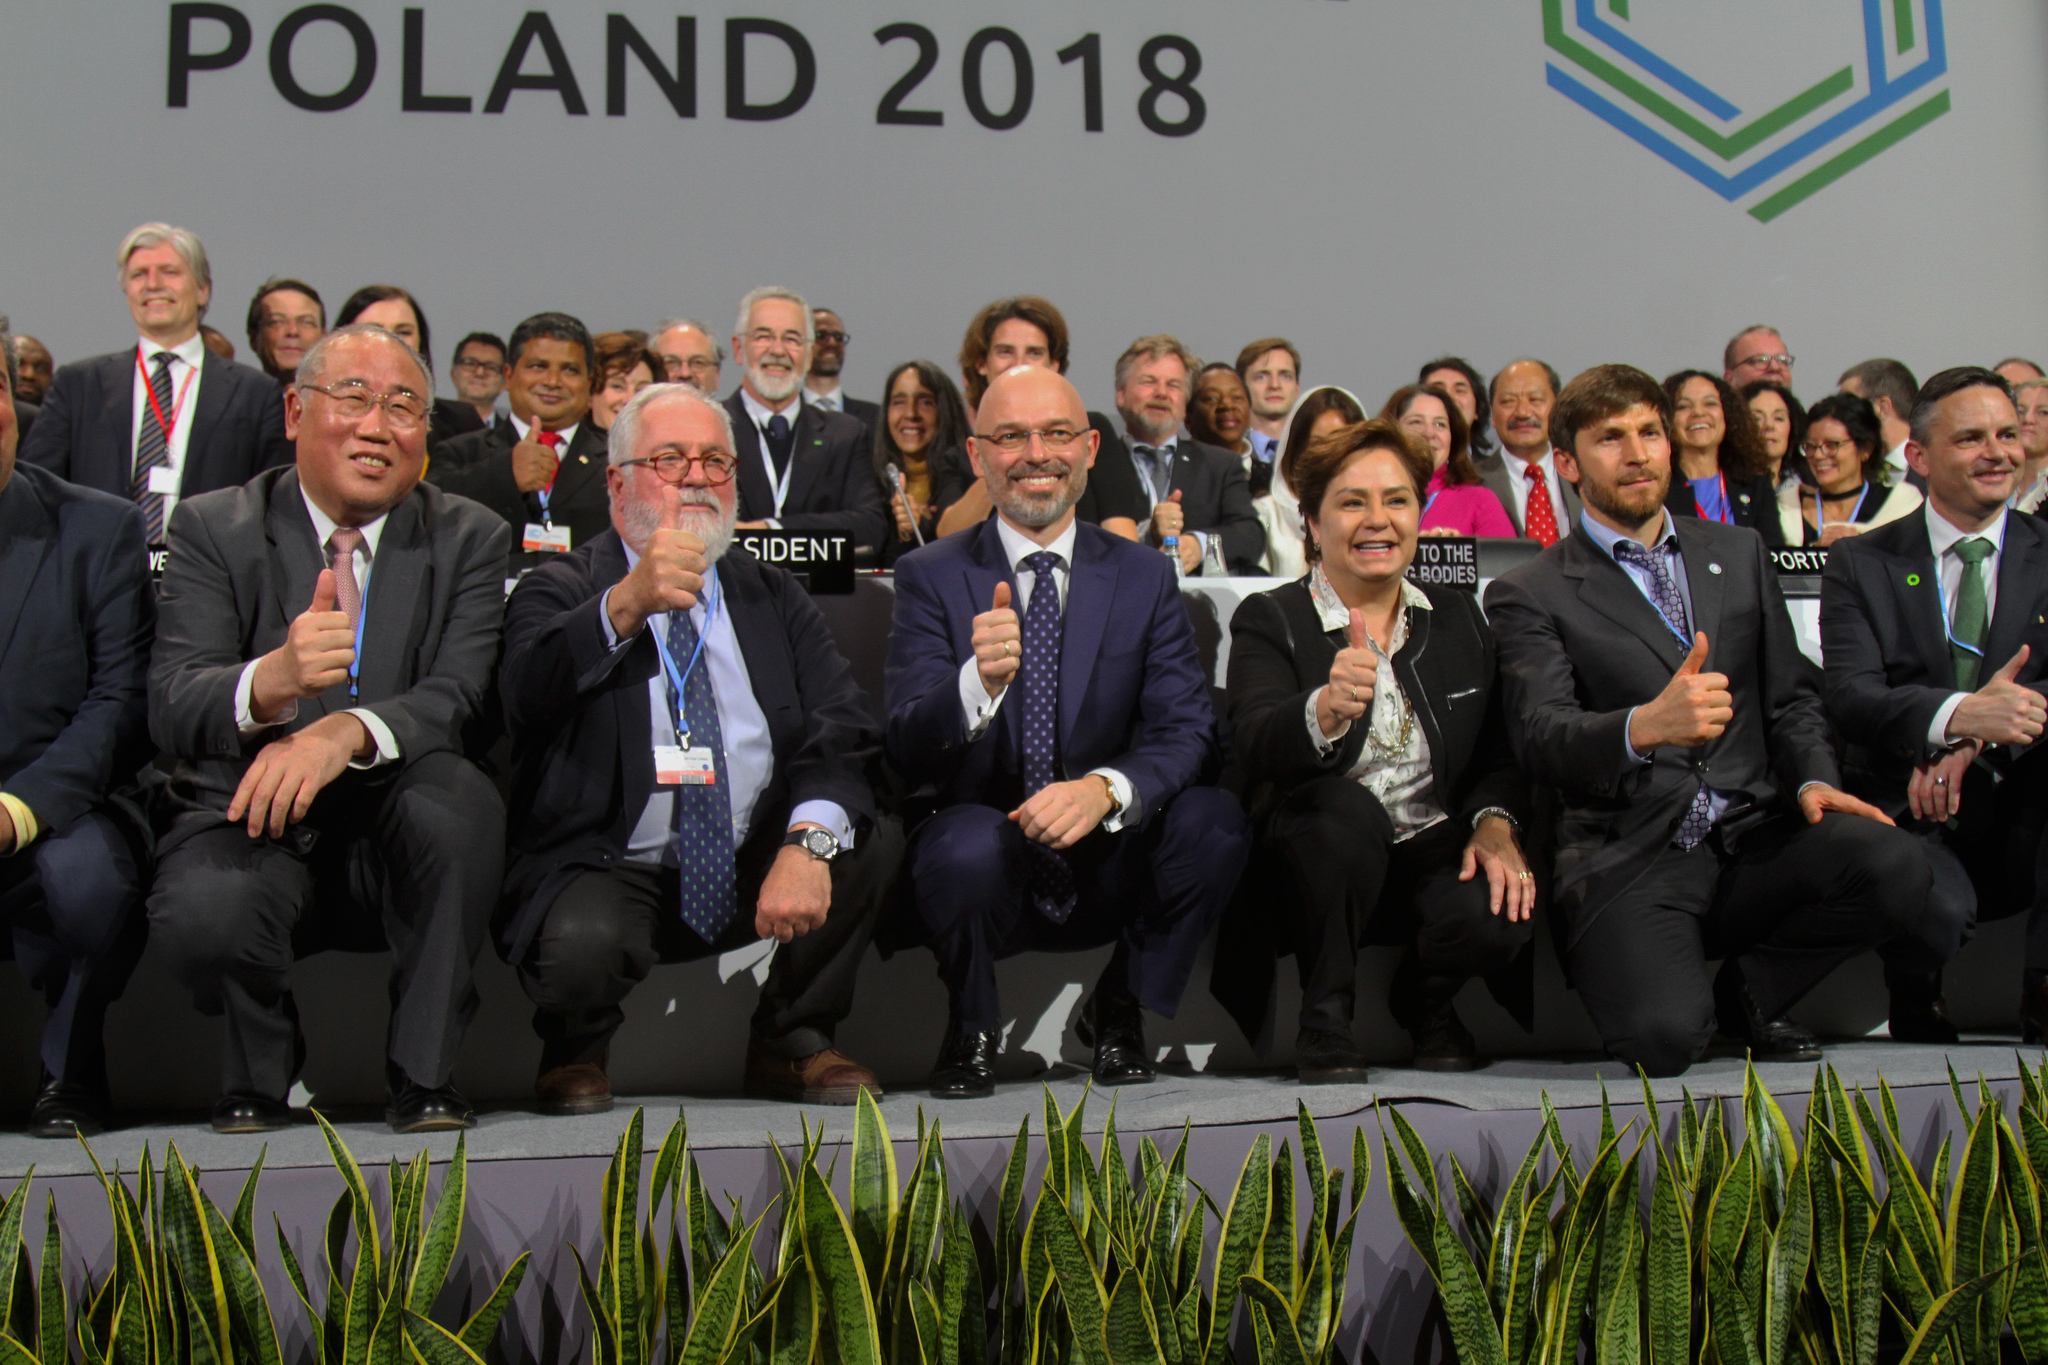 COP24: With rules, but without ambition